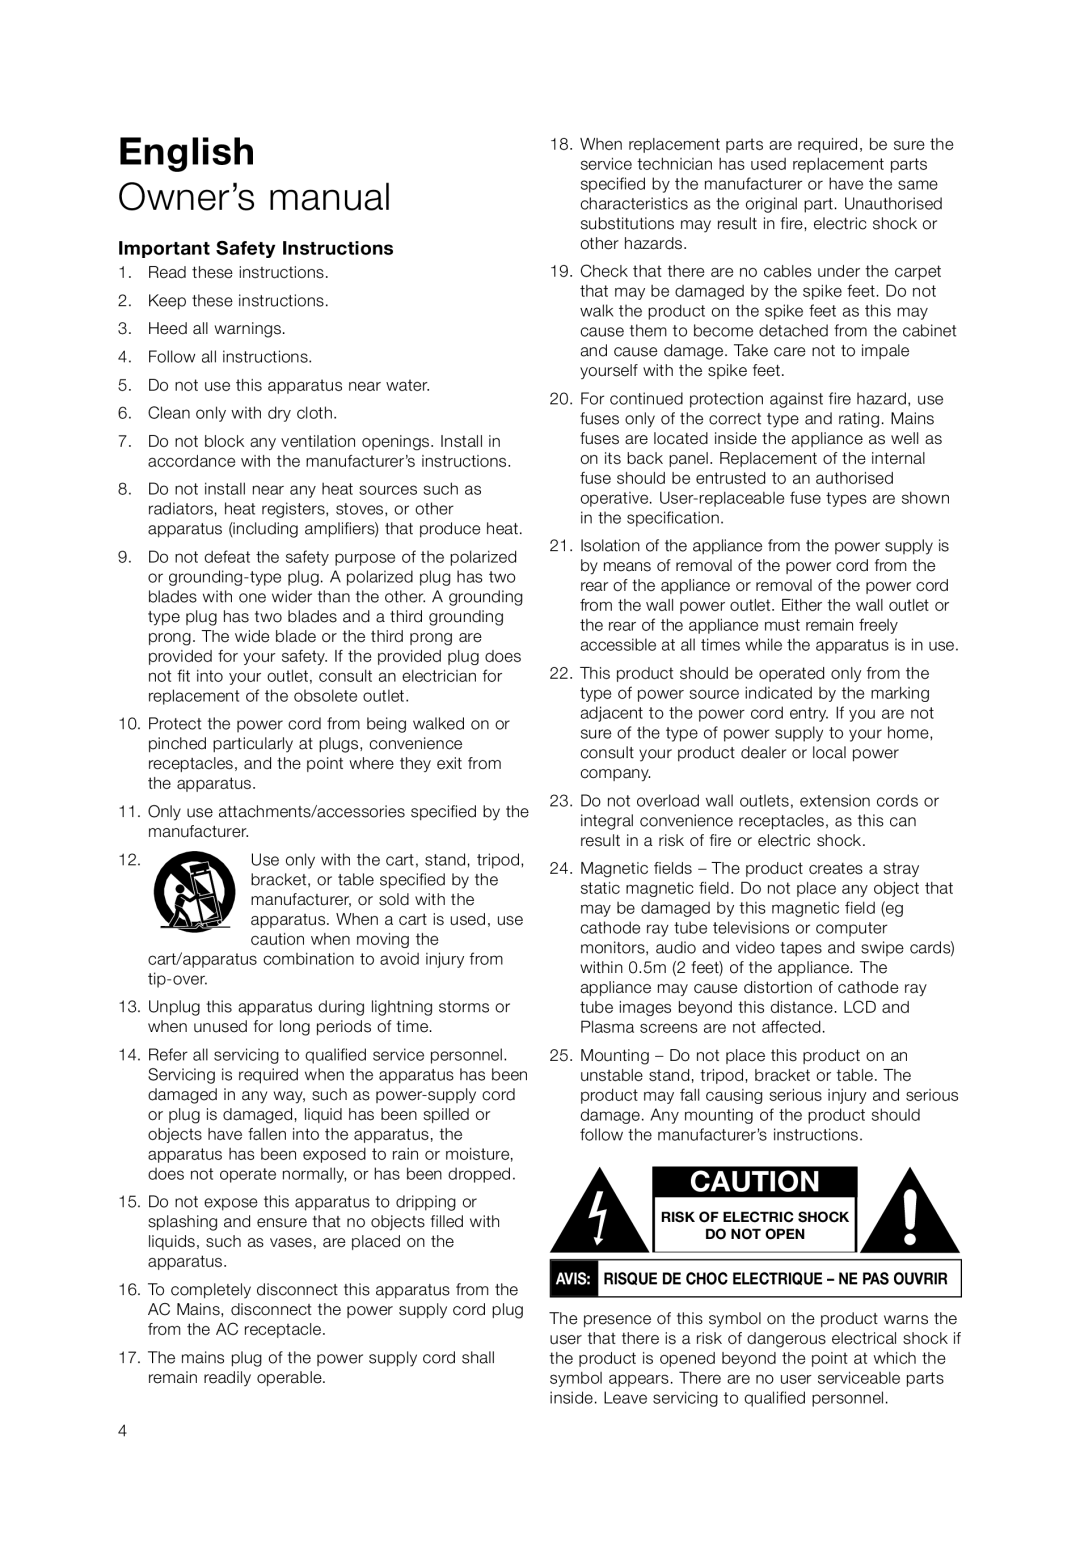 Bowers & Wilkins ASW 12CM, ASW 10CM owner manual English, Owner’s manual, Important Safety Instructions 